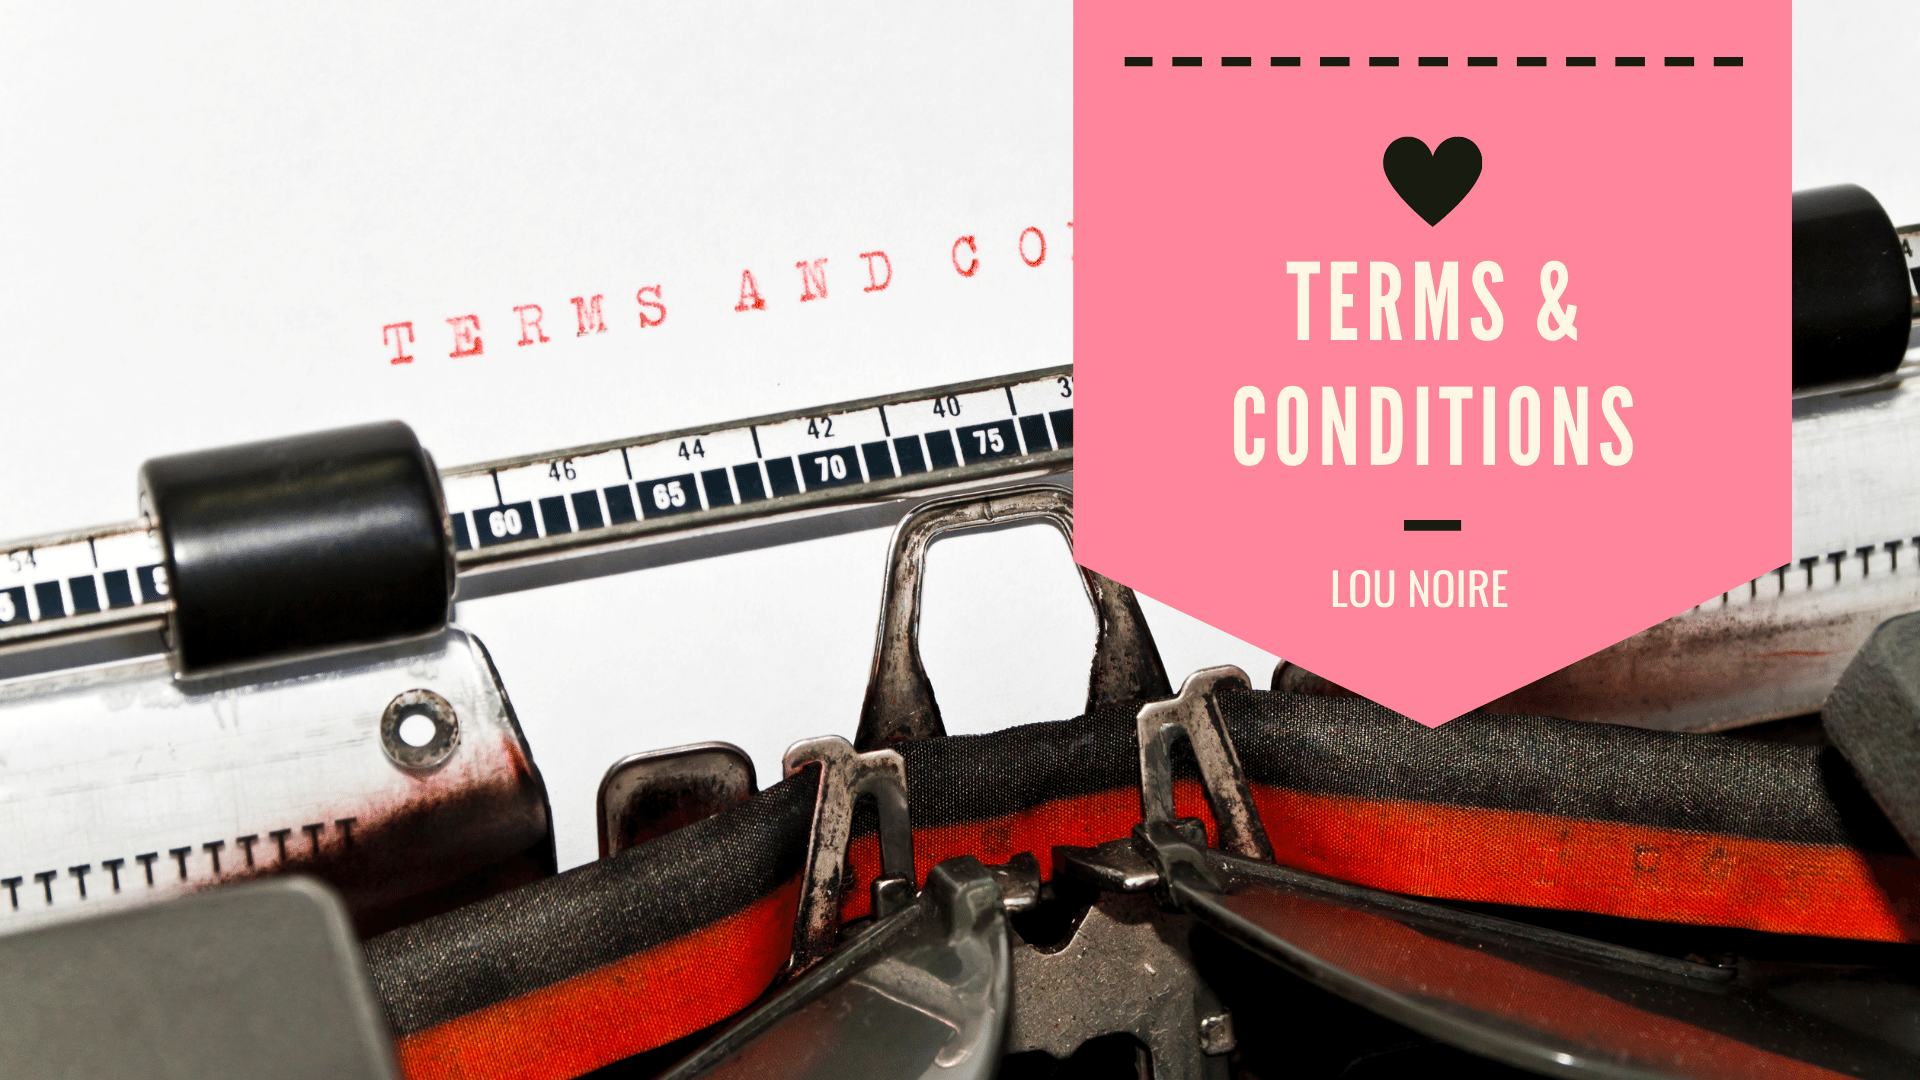 Terms and conditions - Lou Noire